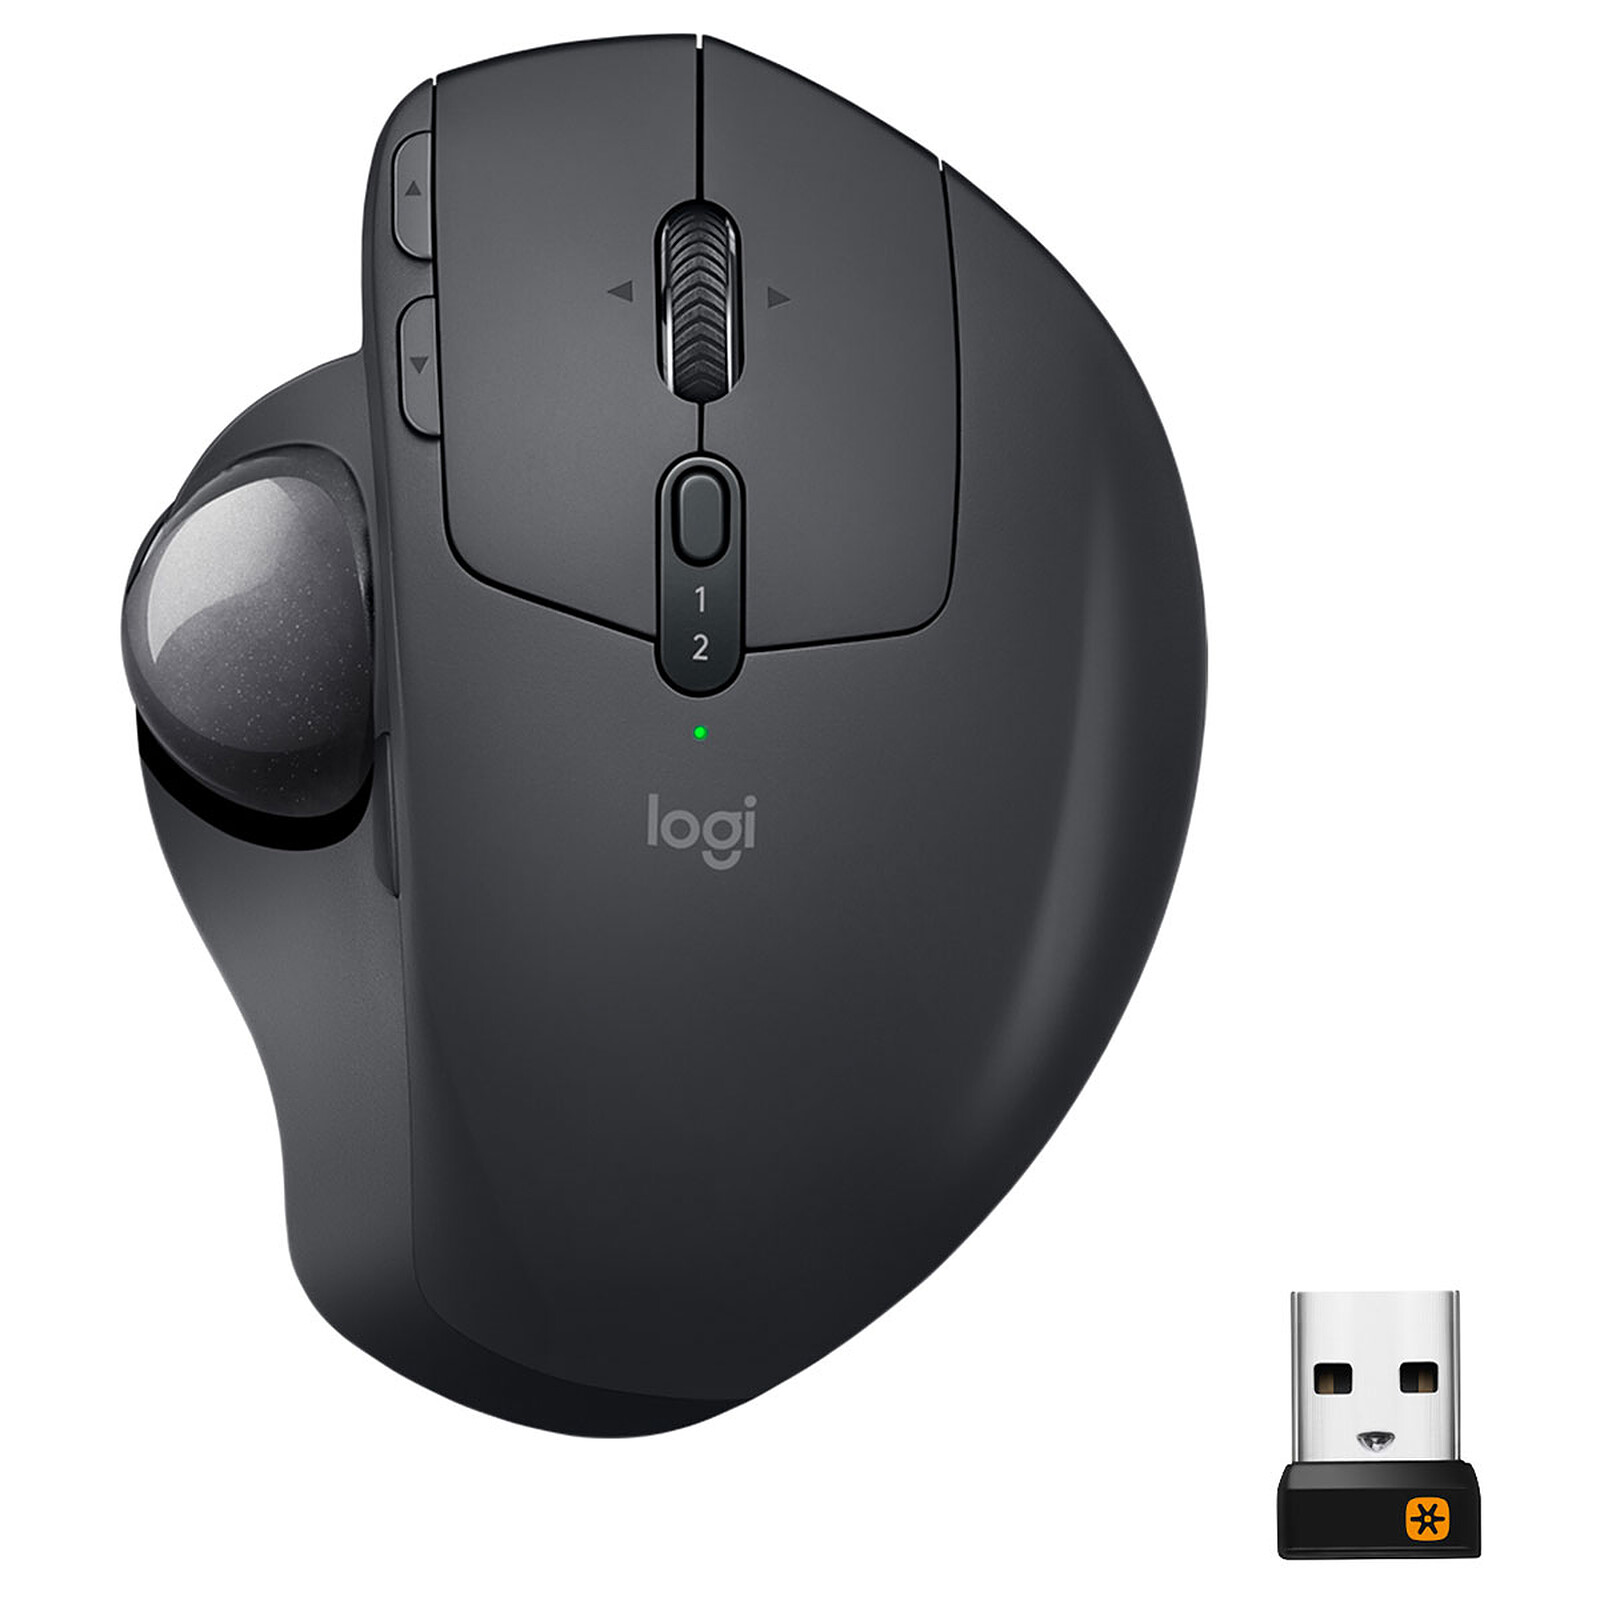 Logitech M570 Wireless Trackball Mouse Review: Unconventional Features